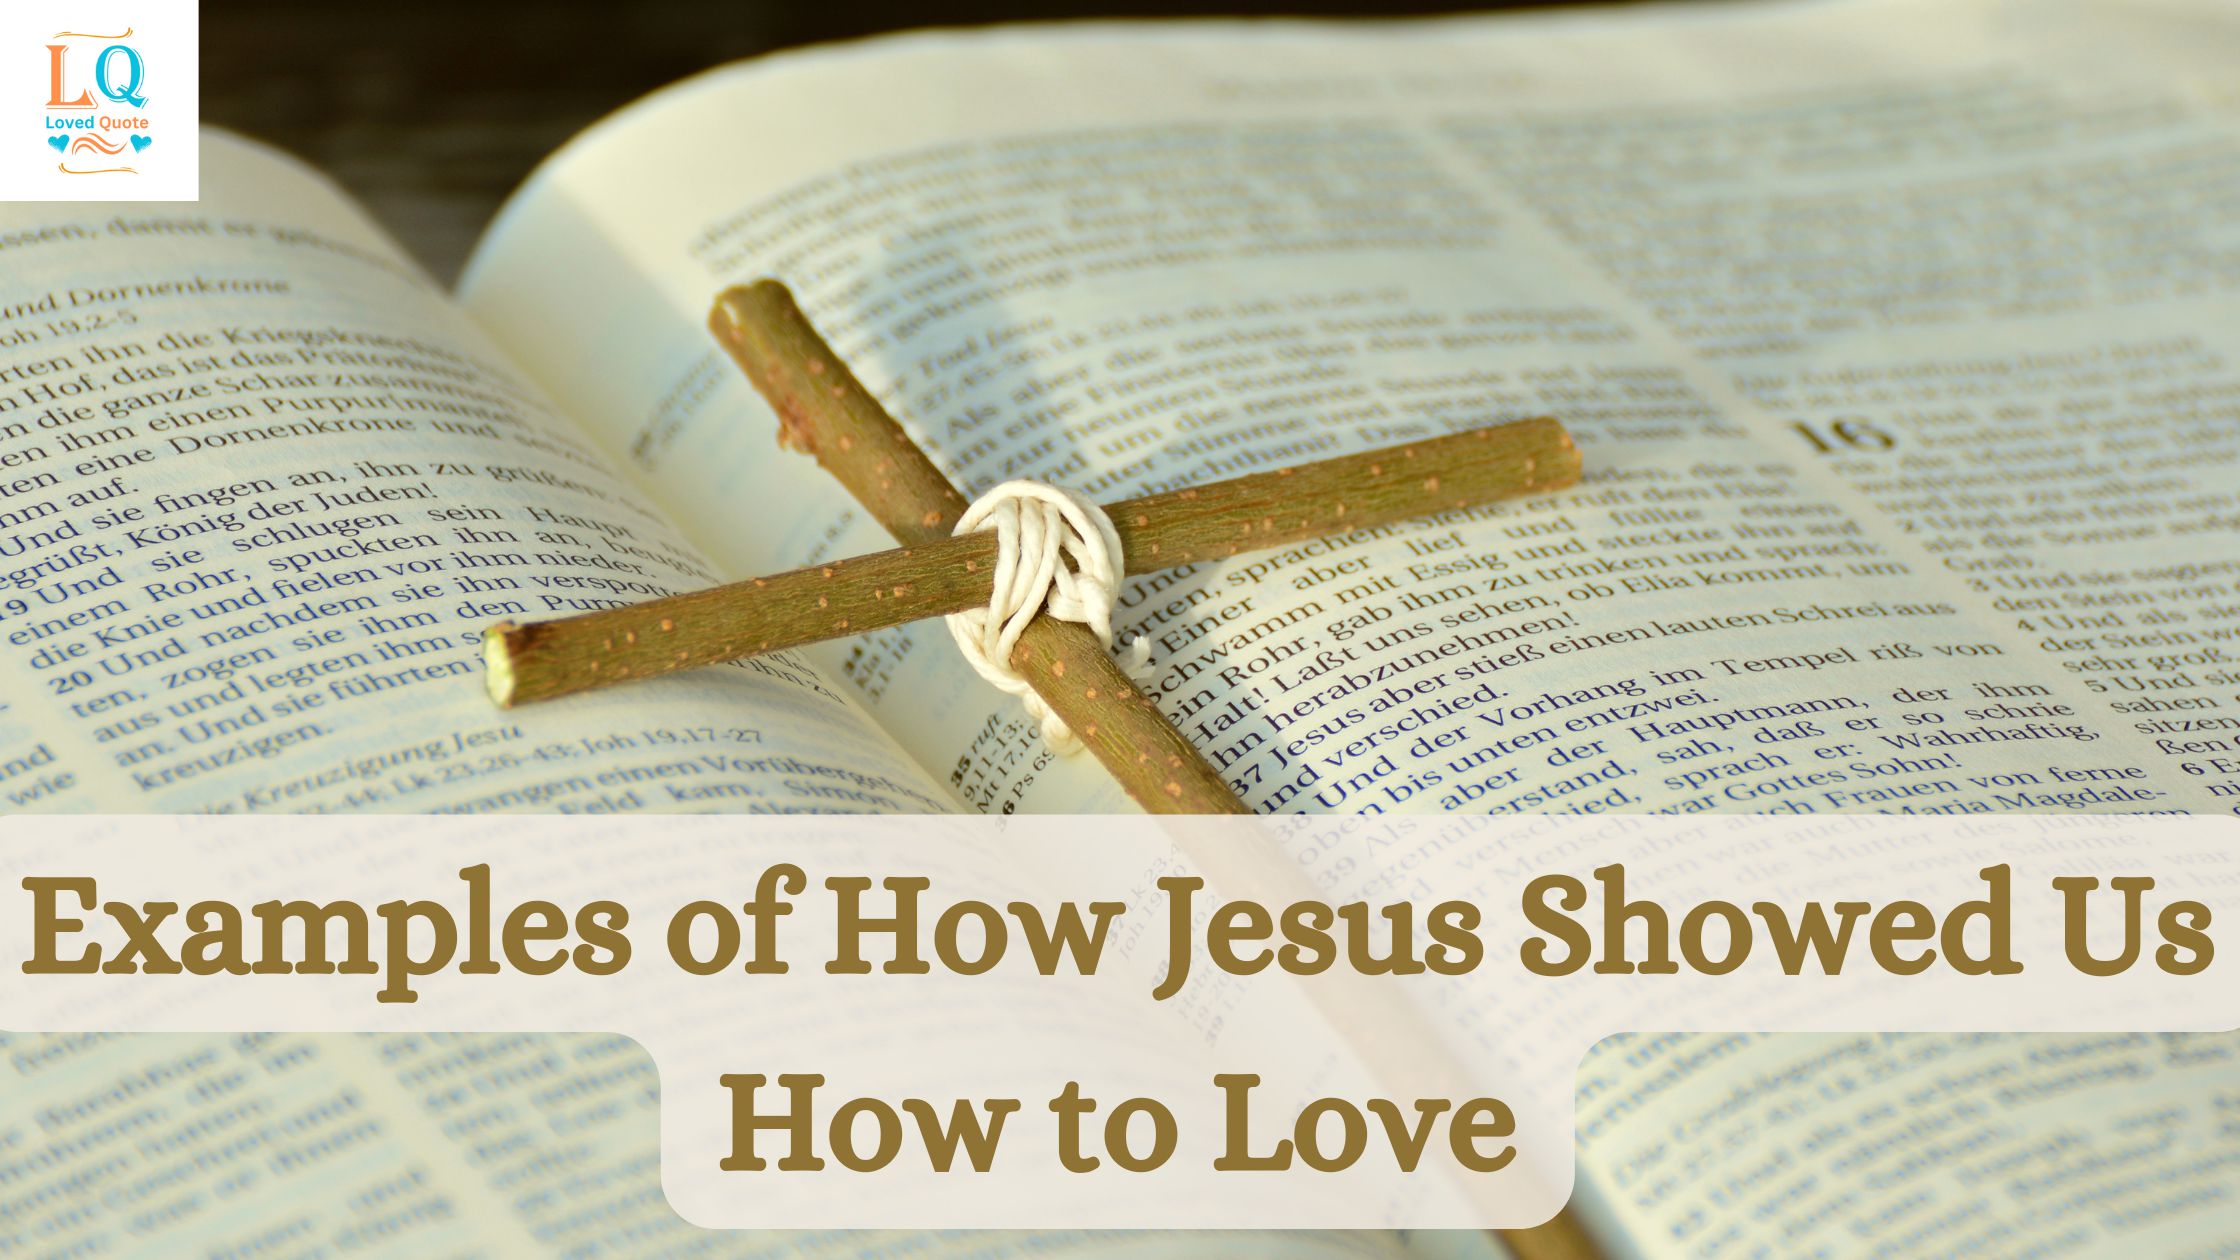 Examples of How Jesus Showed Us How to Love